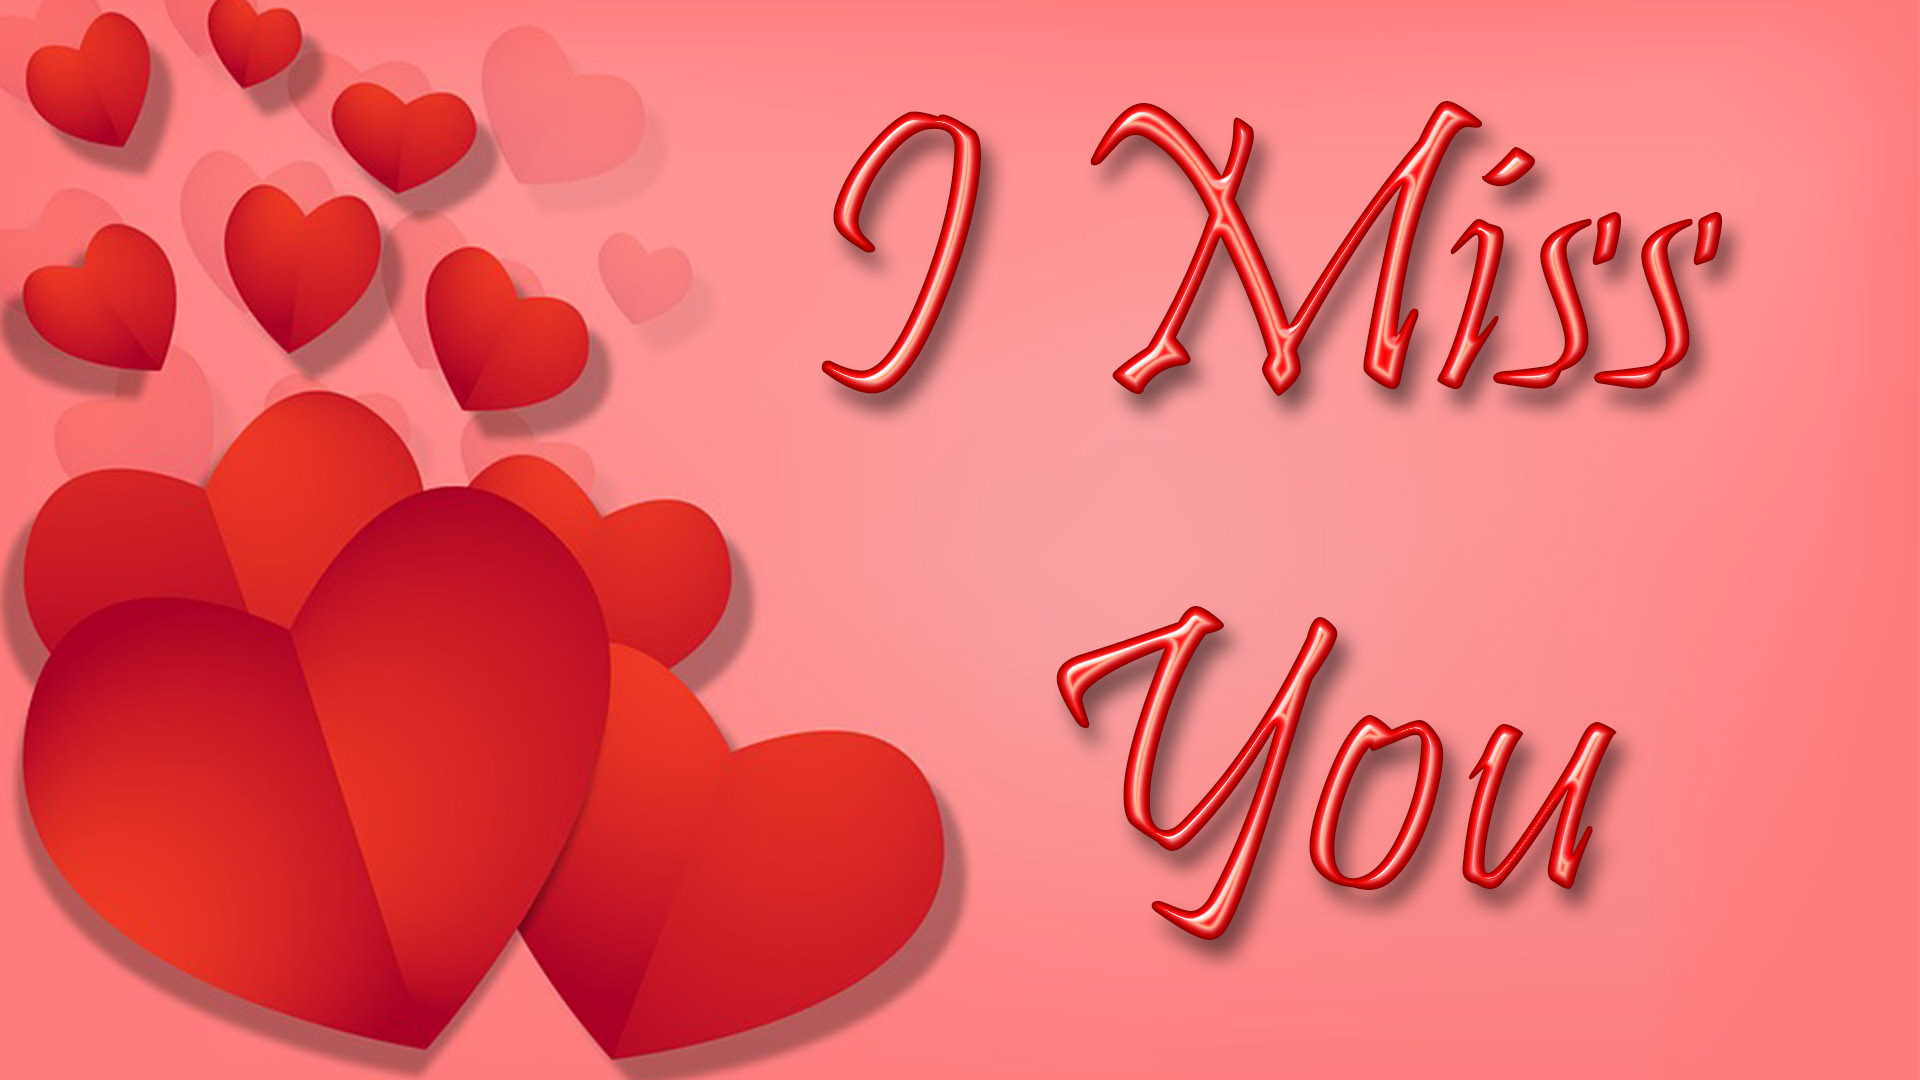 i miss you wallpaper,heart,red,text,valentine's day,love